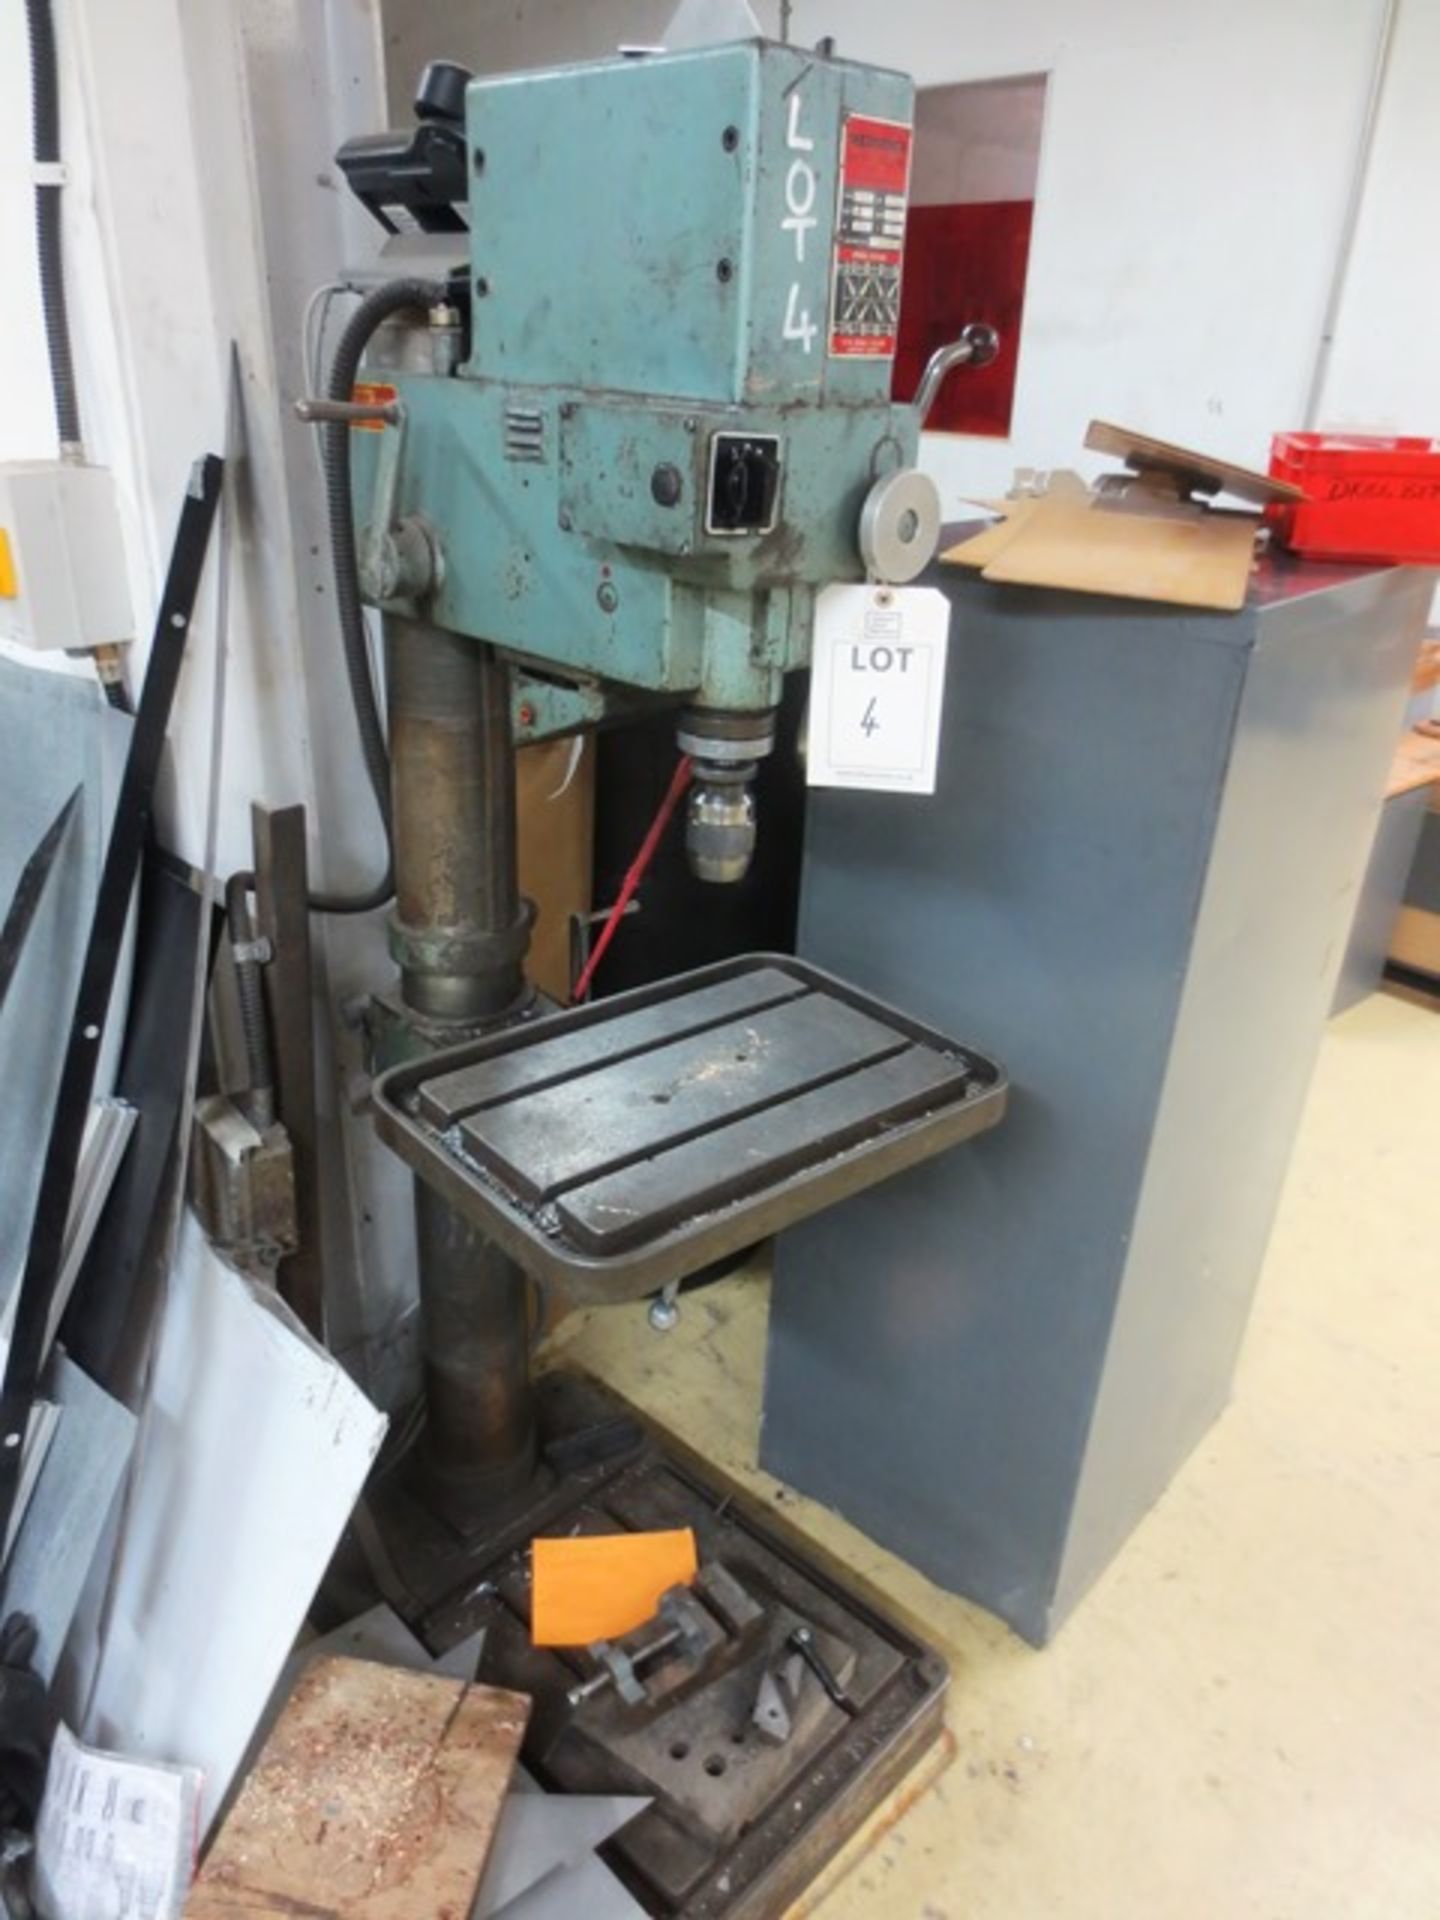 Meddings 532m pillar drill, serial no: 47008, max spindle speed: 1460, table size: 500 x 350mm, 3